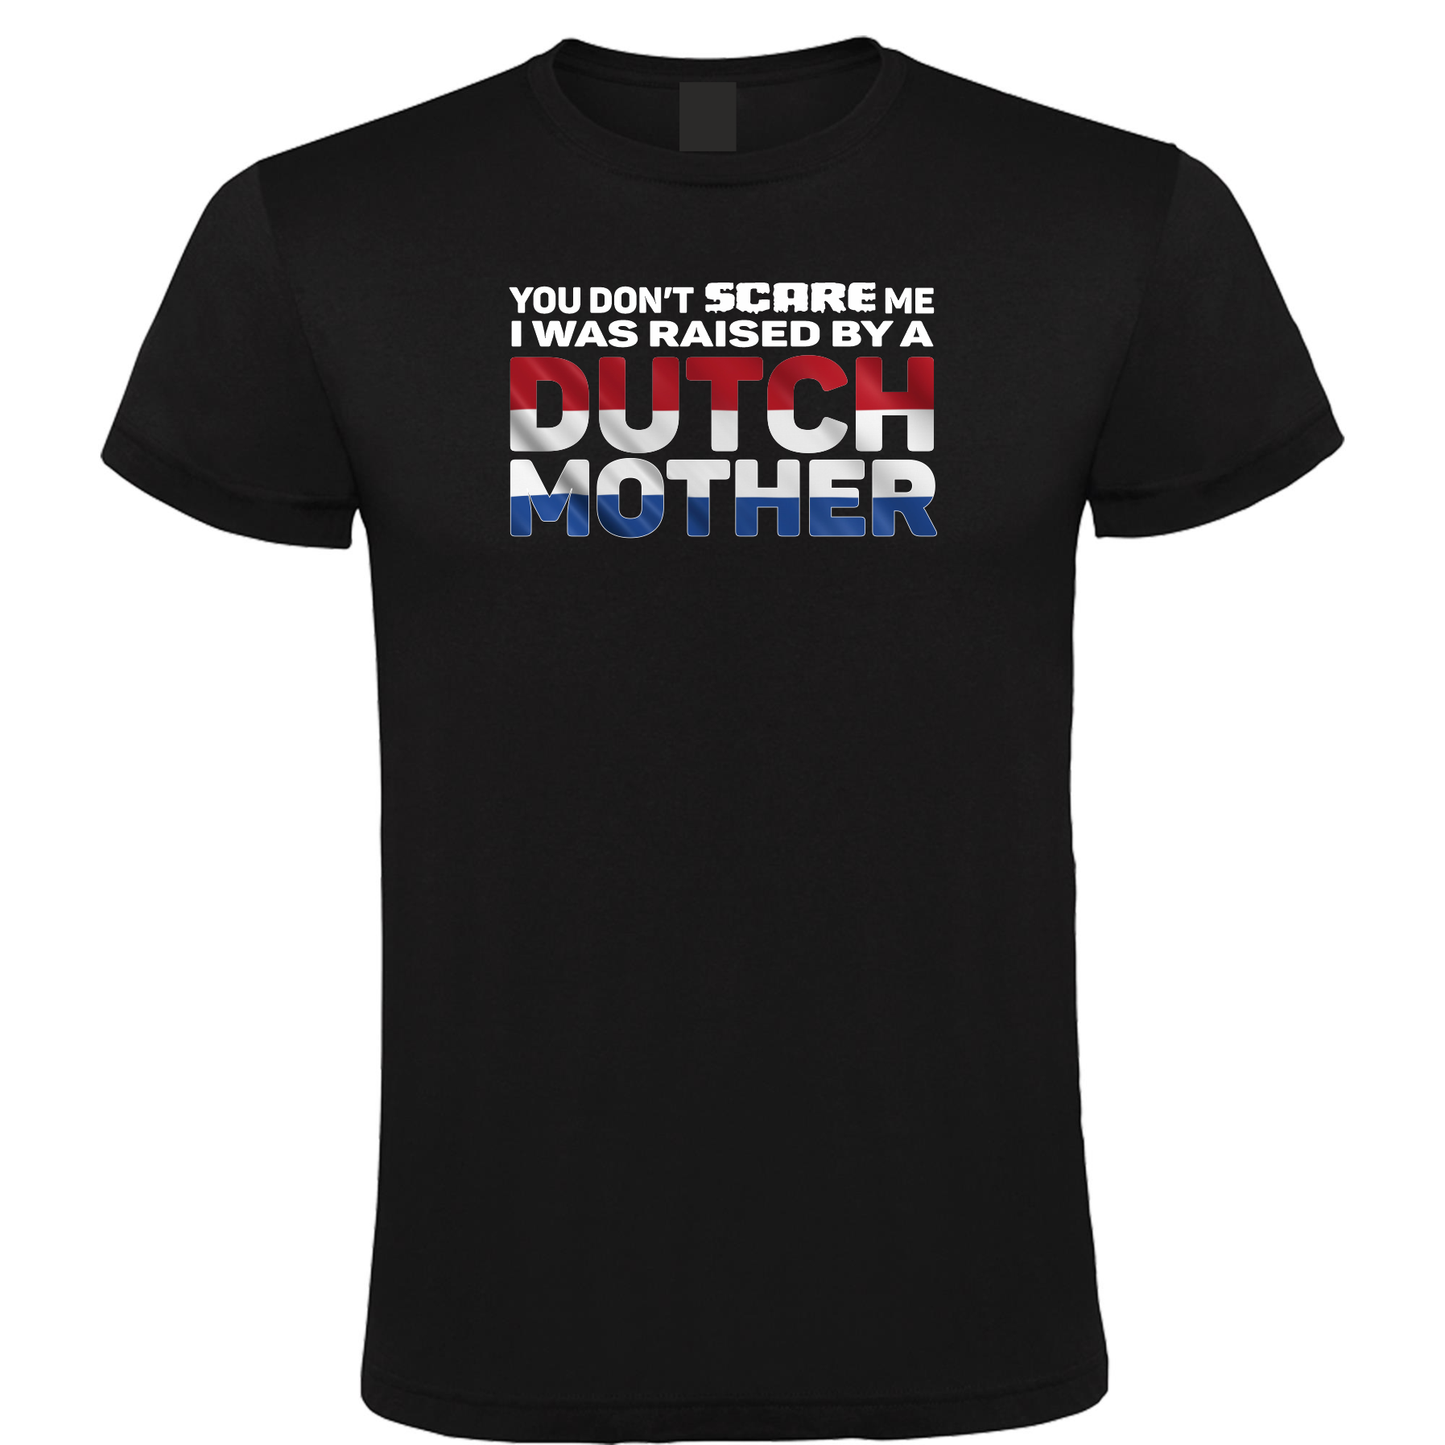 You don't scare me - Heren 3XL